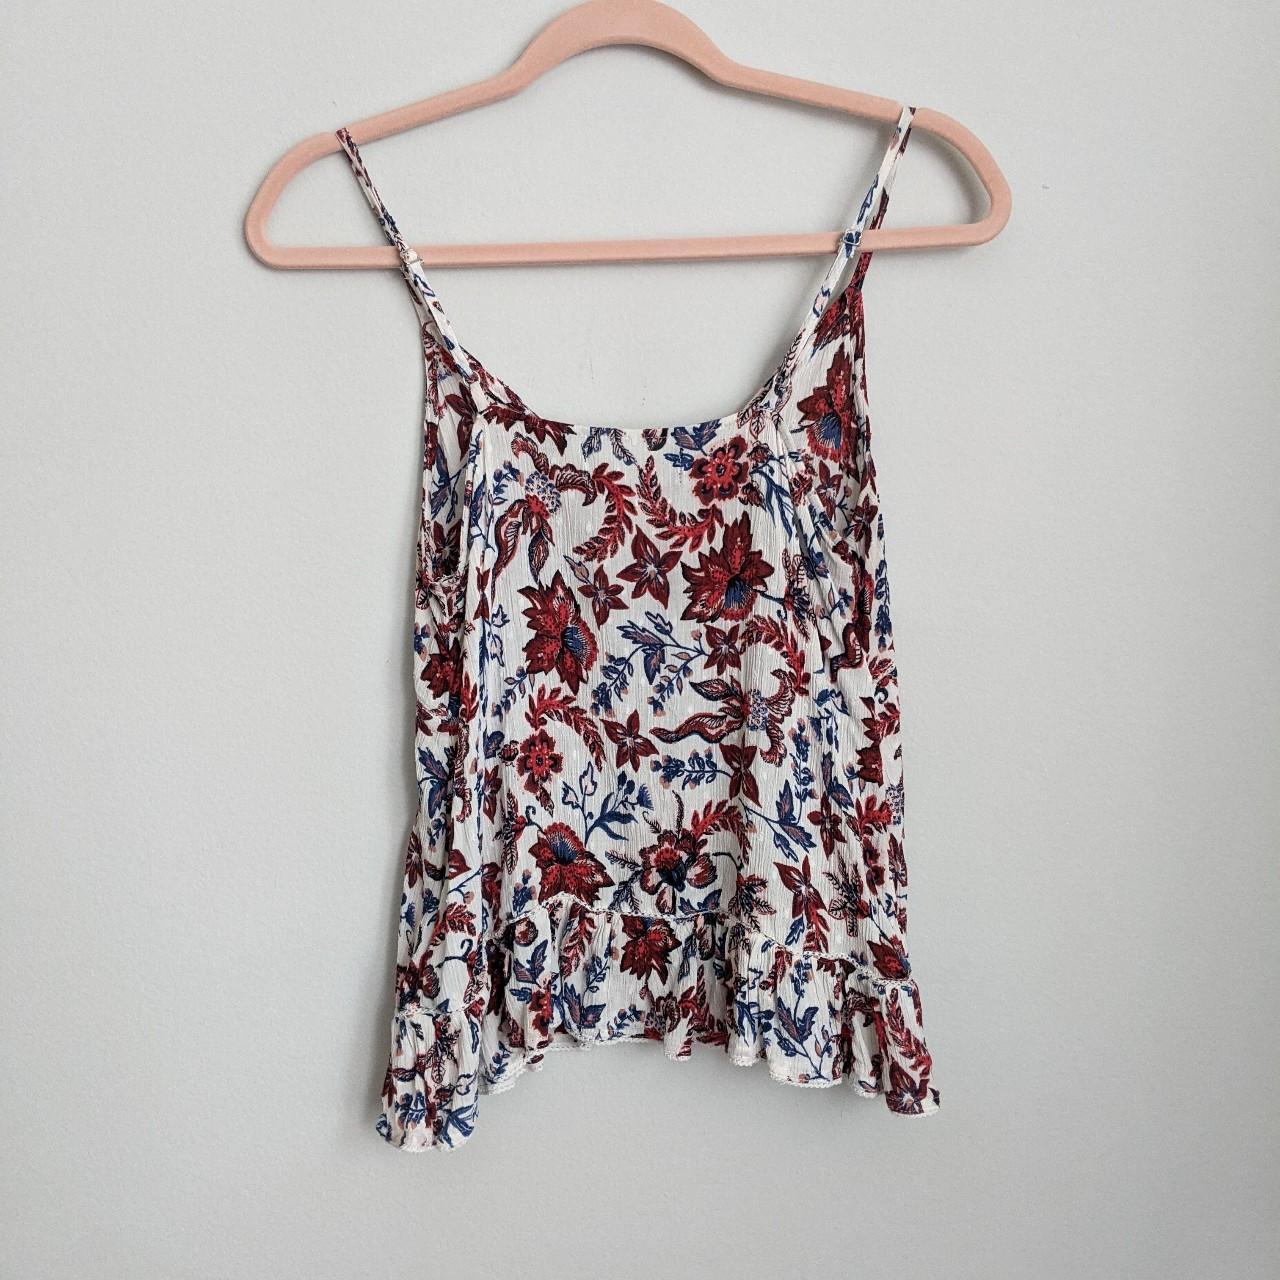 Product Image 2 - Superdry Floral Cami Top

Good used